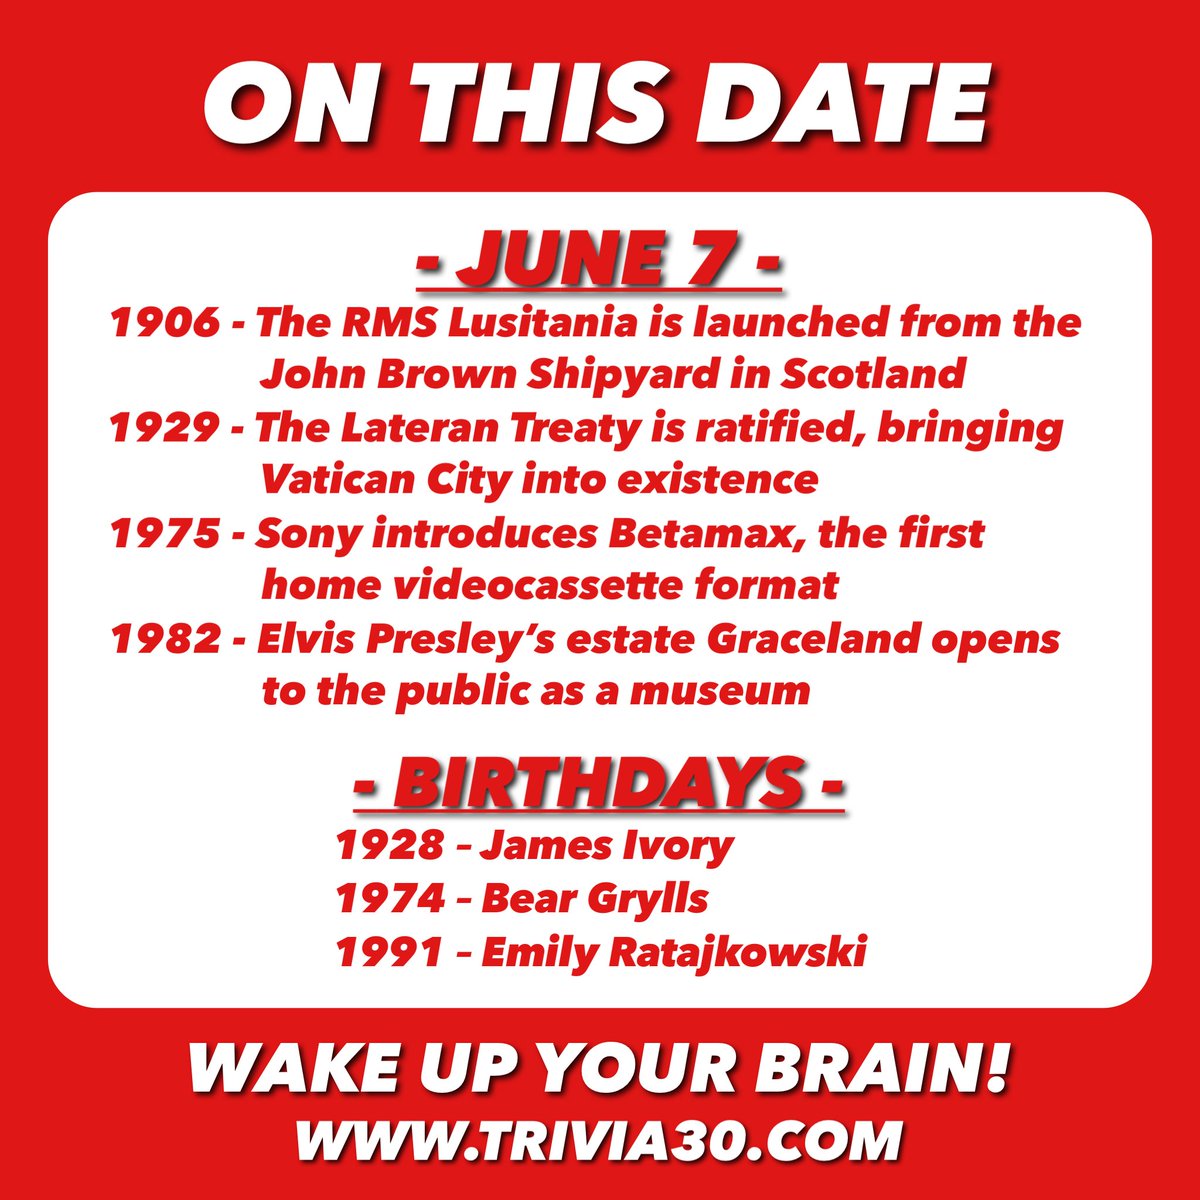 Your OTD for 6/7... Join us for trivia at Dick's Wings or Tidewater Grill, and have a great Wednesday! #trivia30 #wakeupyourbrain #OnThisDay #Lusitania #Scotland #Vatican #SONY #Betamax #Elvis #ElvisPresley #Graceland #MEMPHIS #JamesIvory #BearGrylls #EmilyRatajkowski #emrata